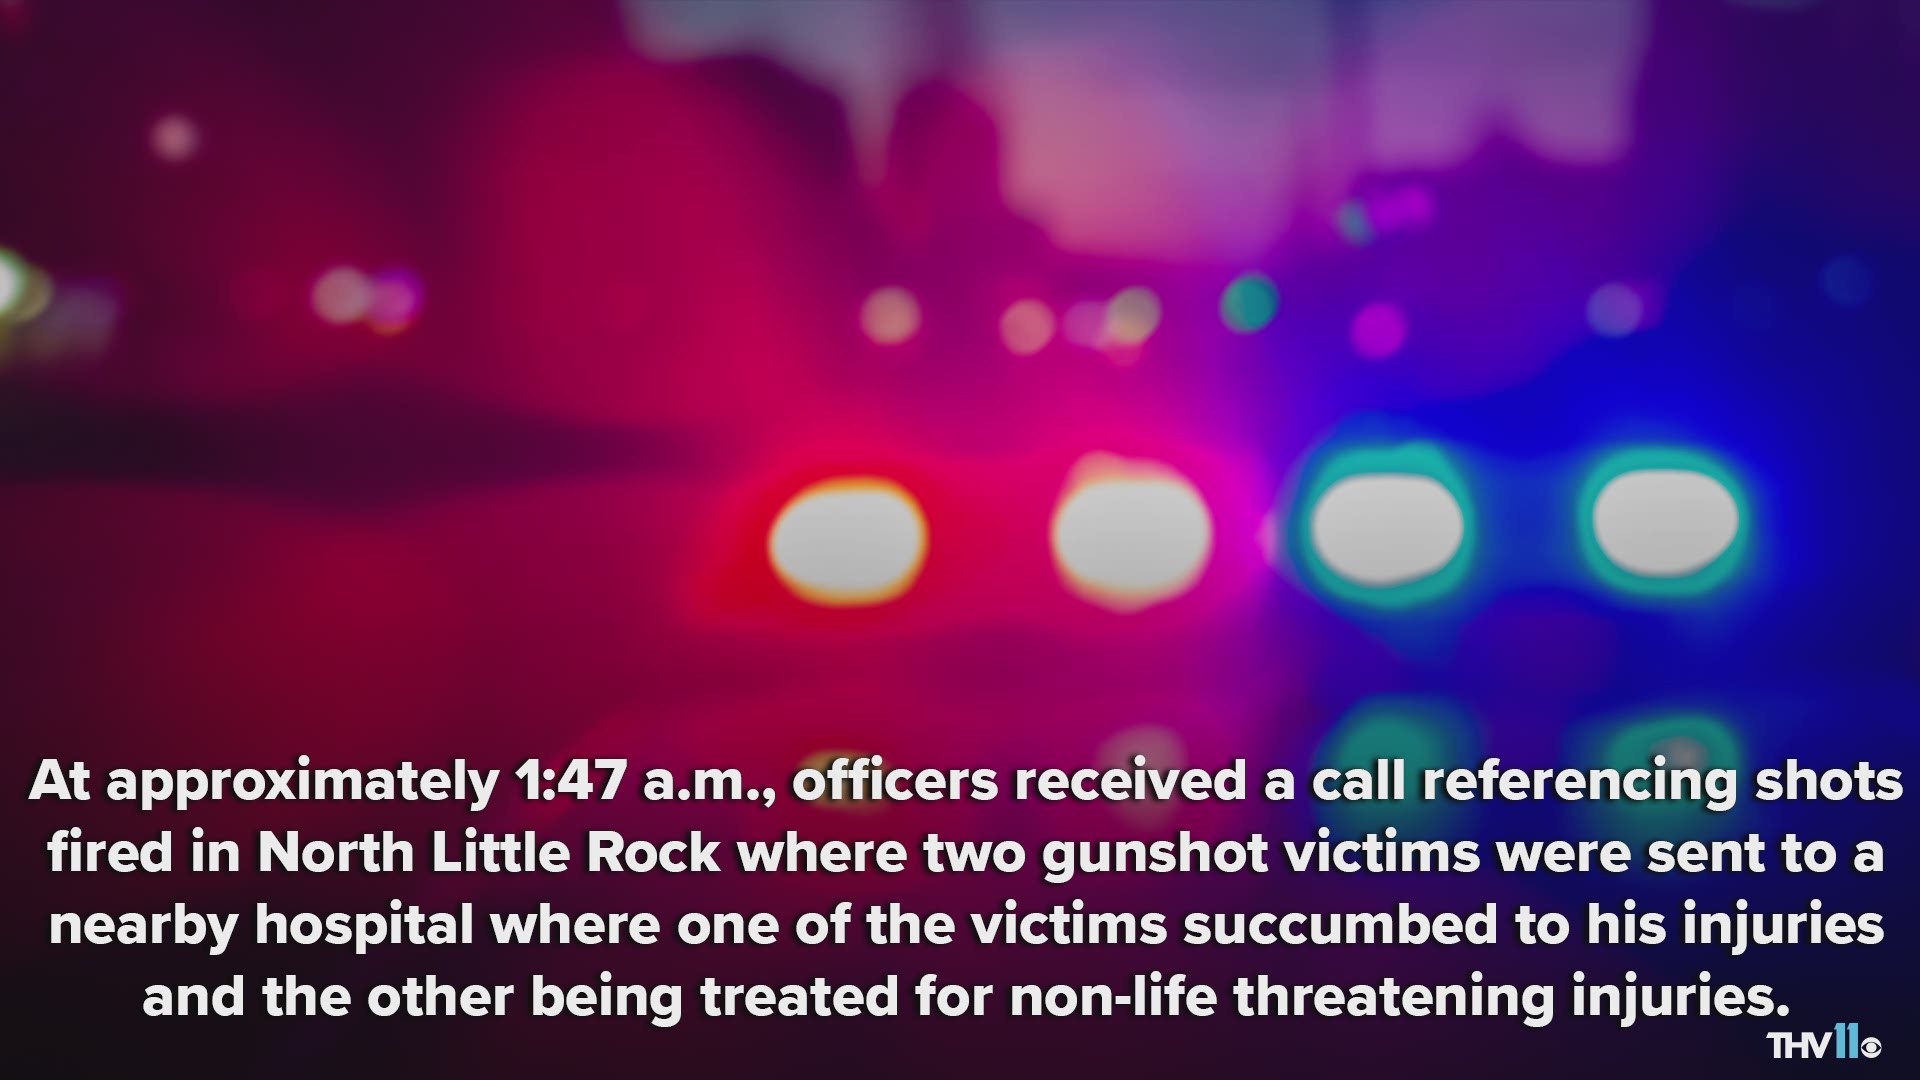 Officers received a call referencing shots fired on Sunday morning where two victims were sent to a nearby hospital, one succumbing to his injuries.